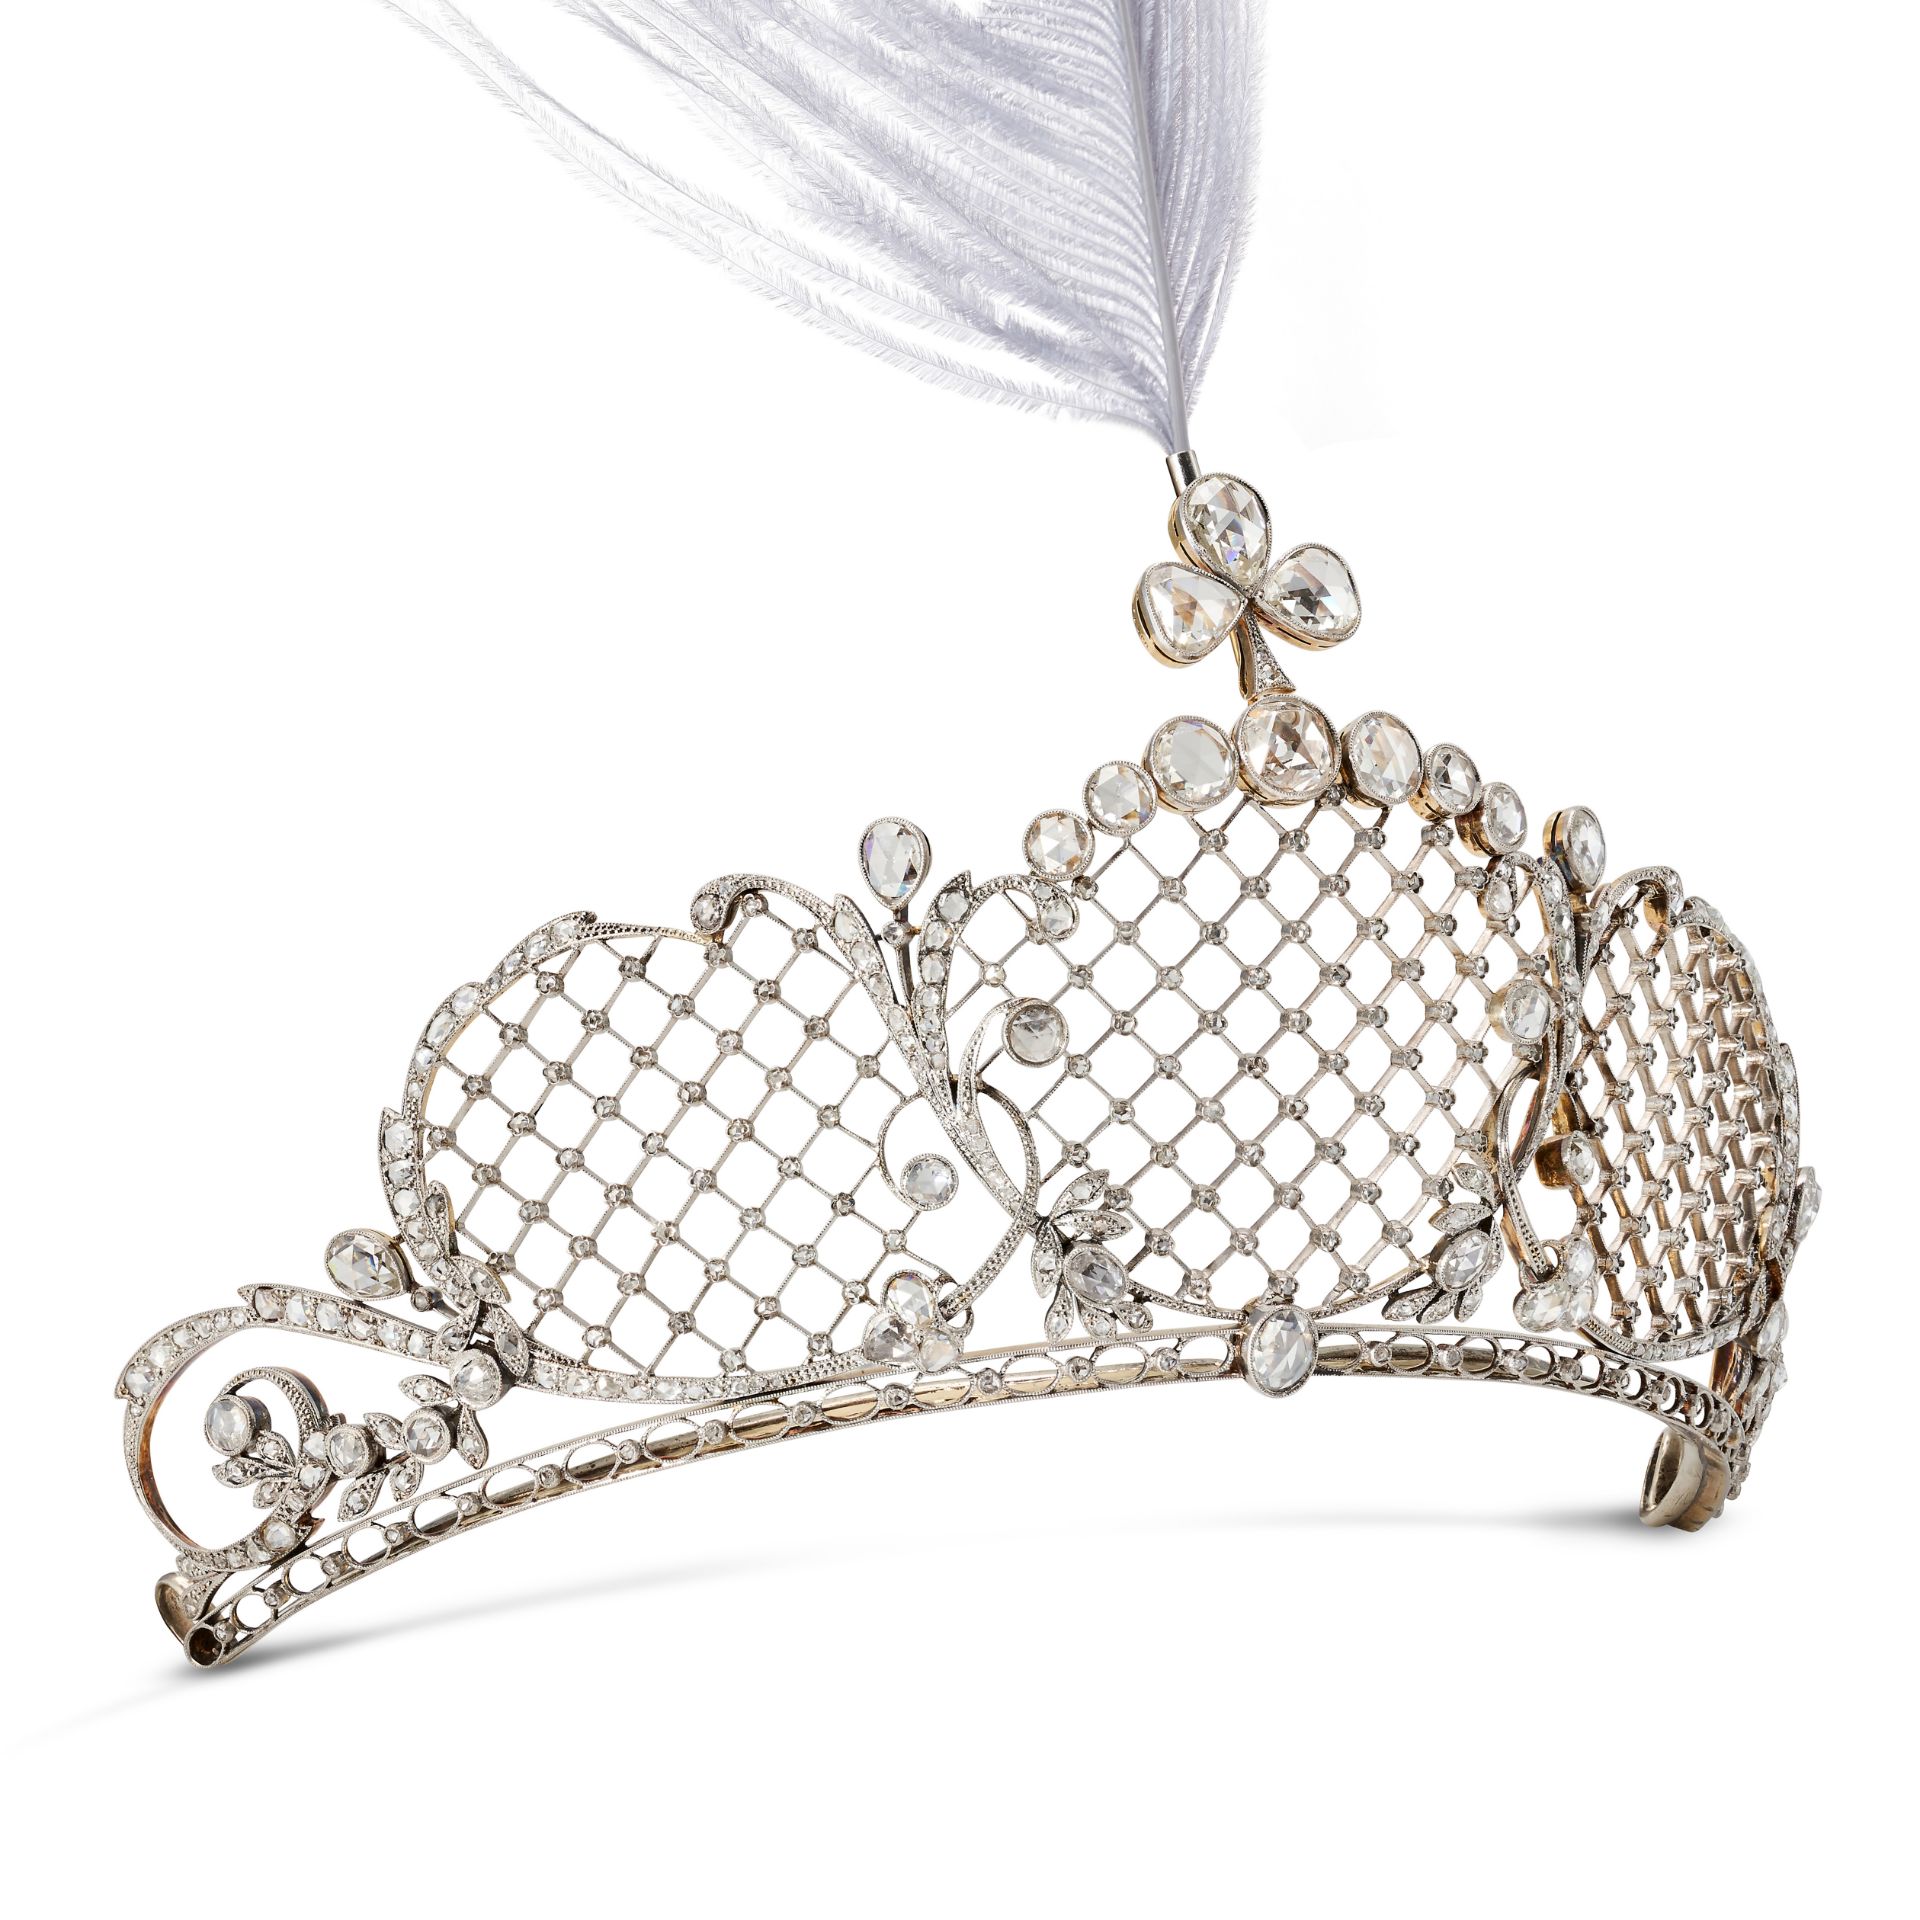 J.E CALDWELL, A FINE BELLE EPOQUE DIAMOND TIARA in 18ct yellow gold and platinum, the tapering la... - Image 3 of 6